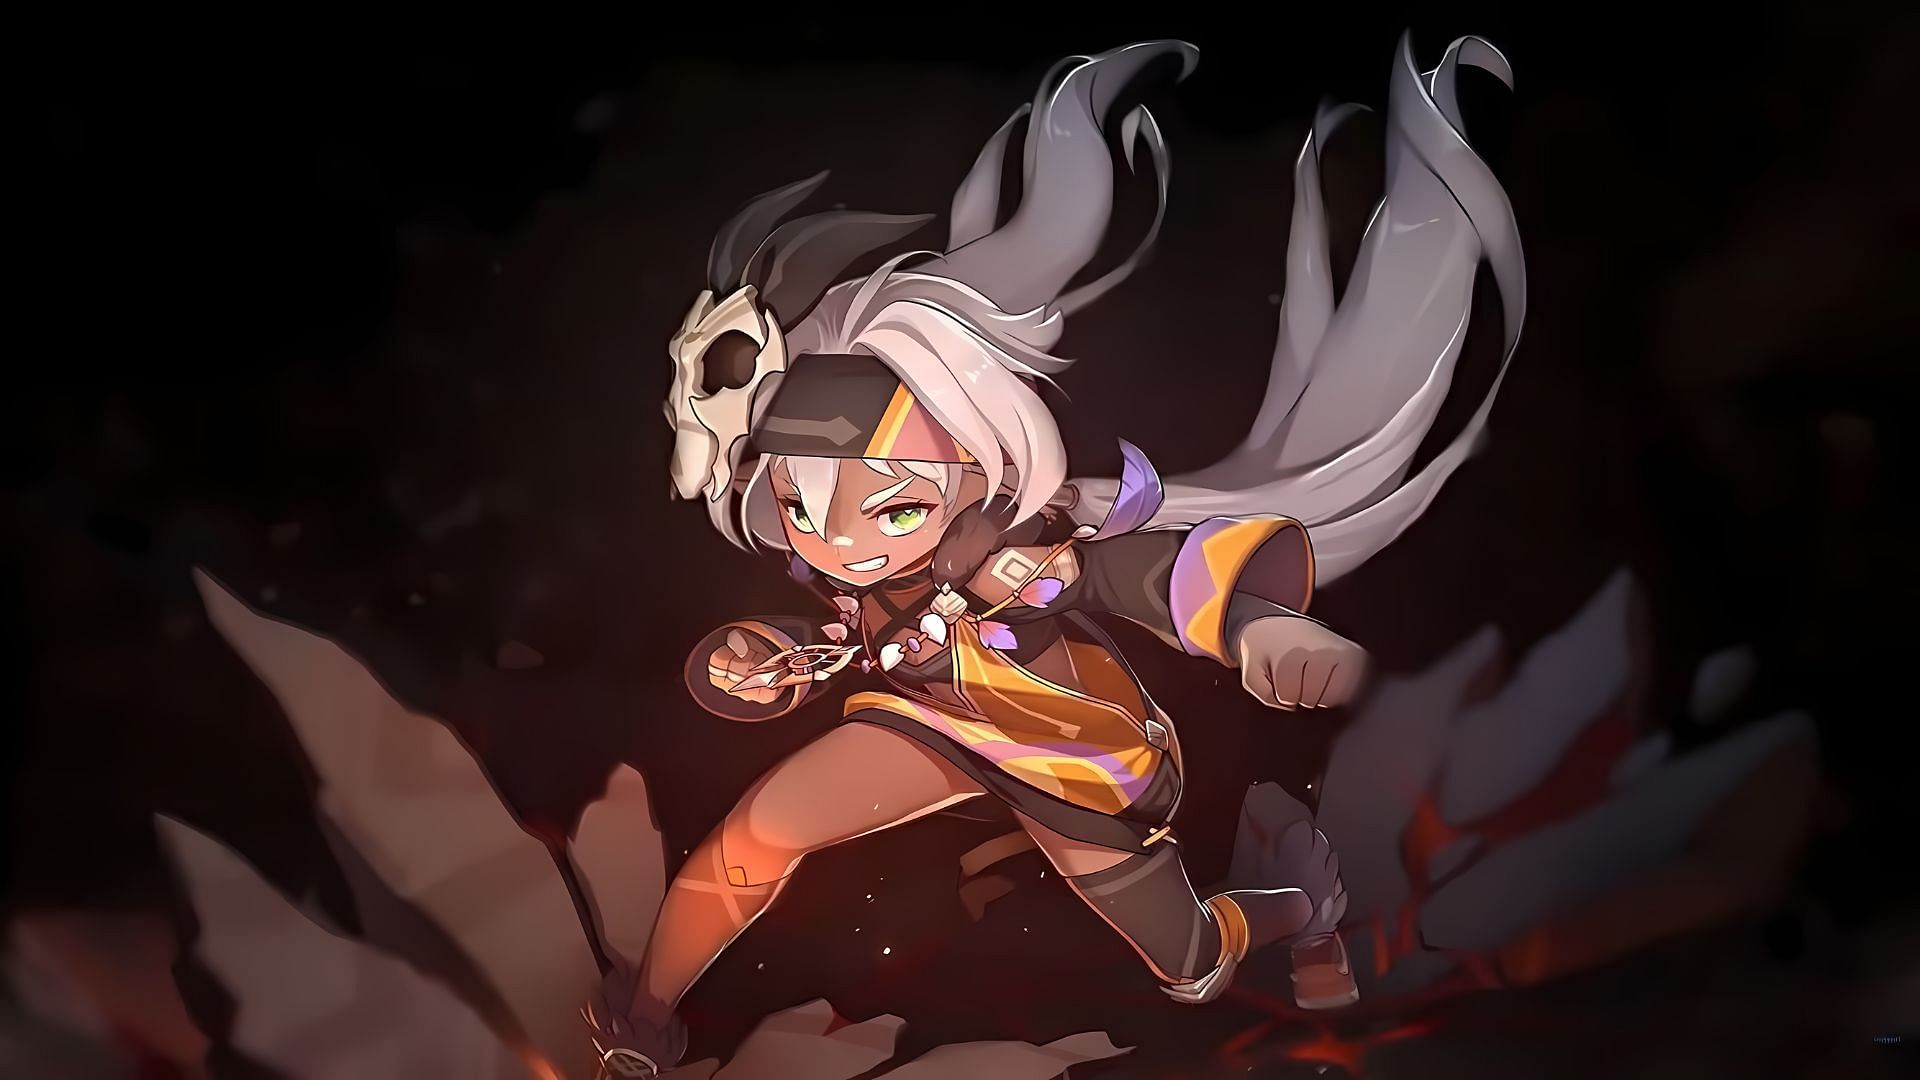 A glimpse of Iansan from the official storyline preview video (Image via Kuro Games)